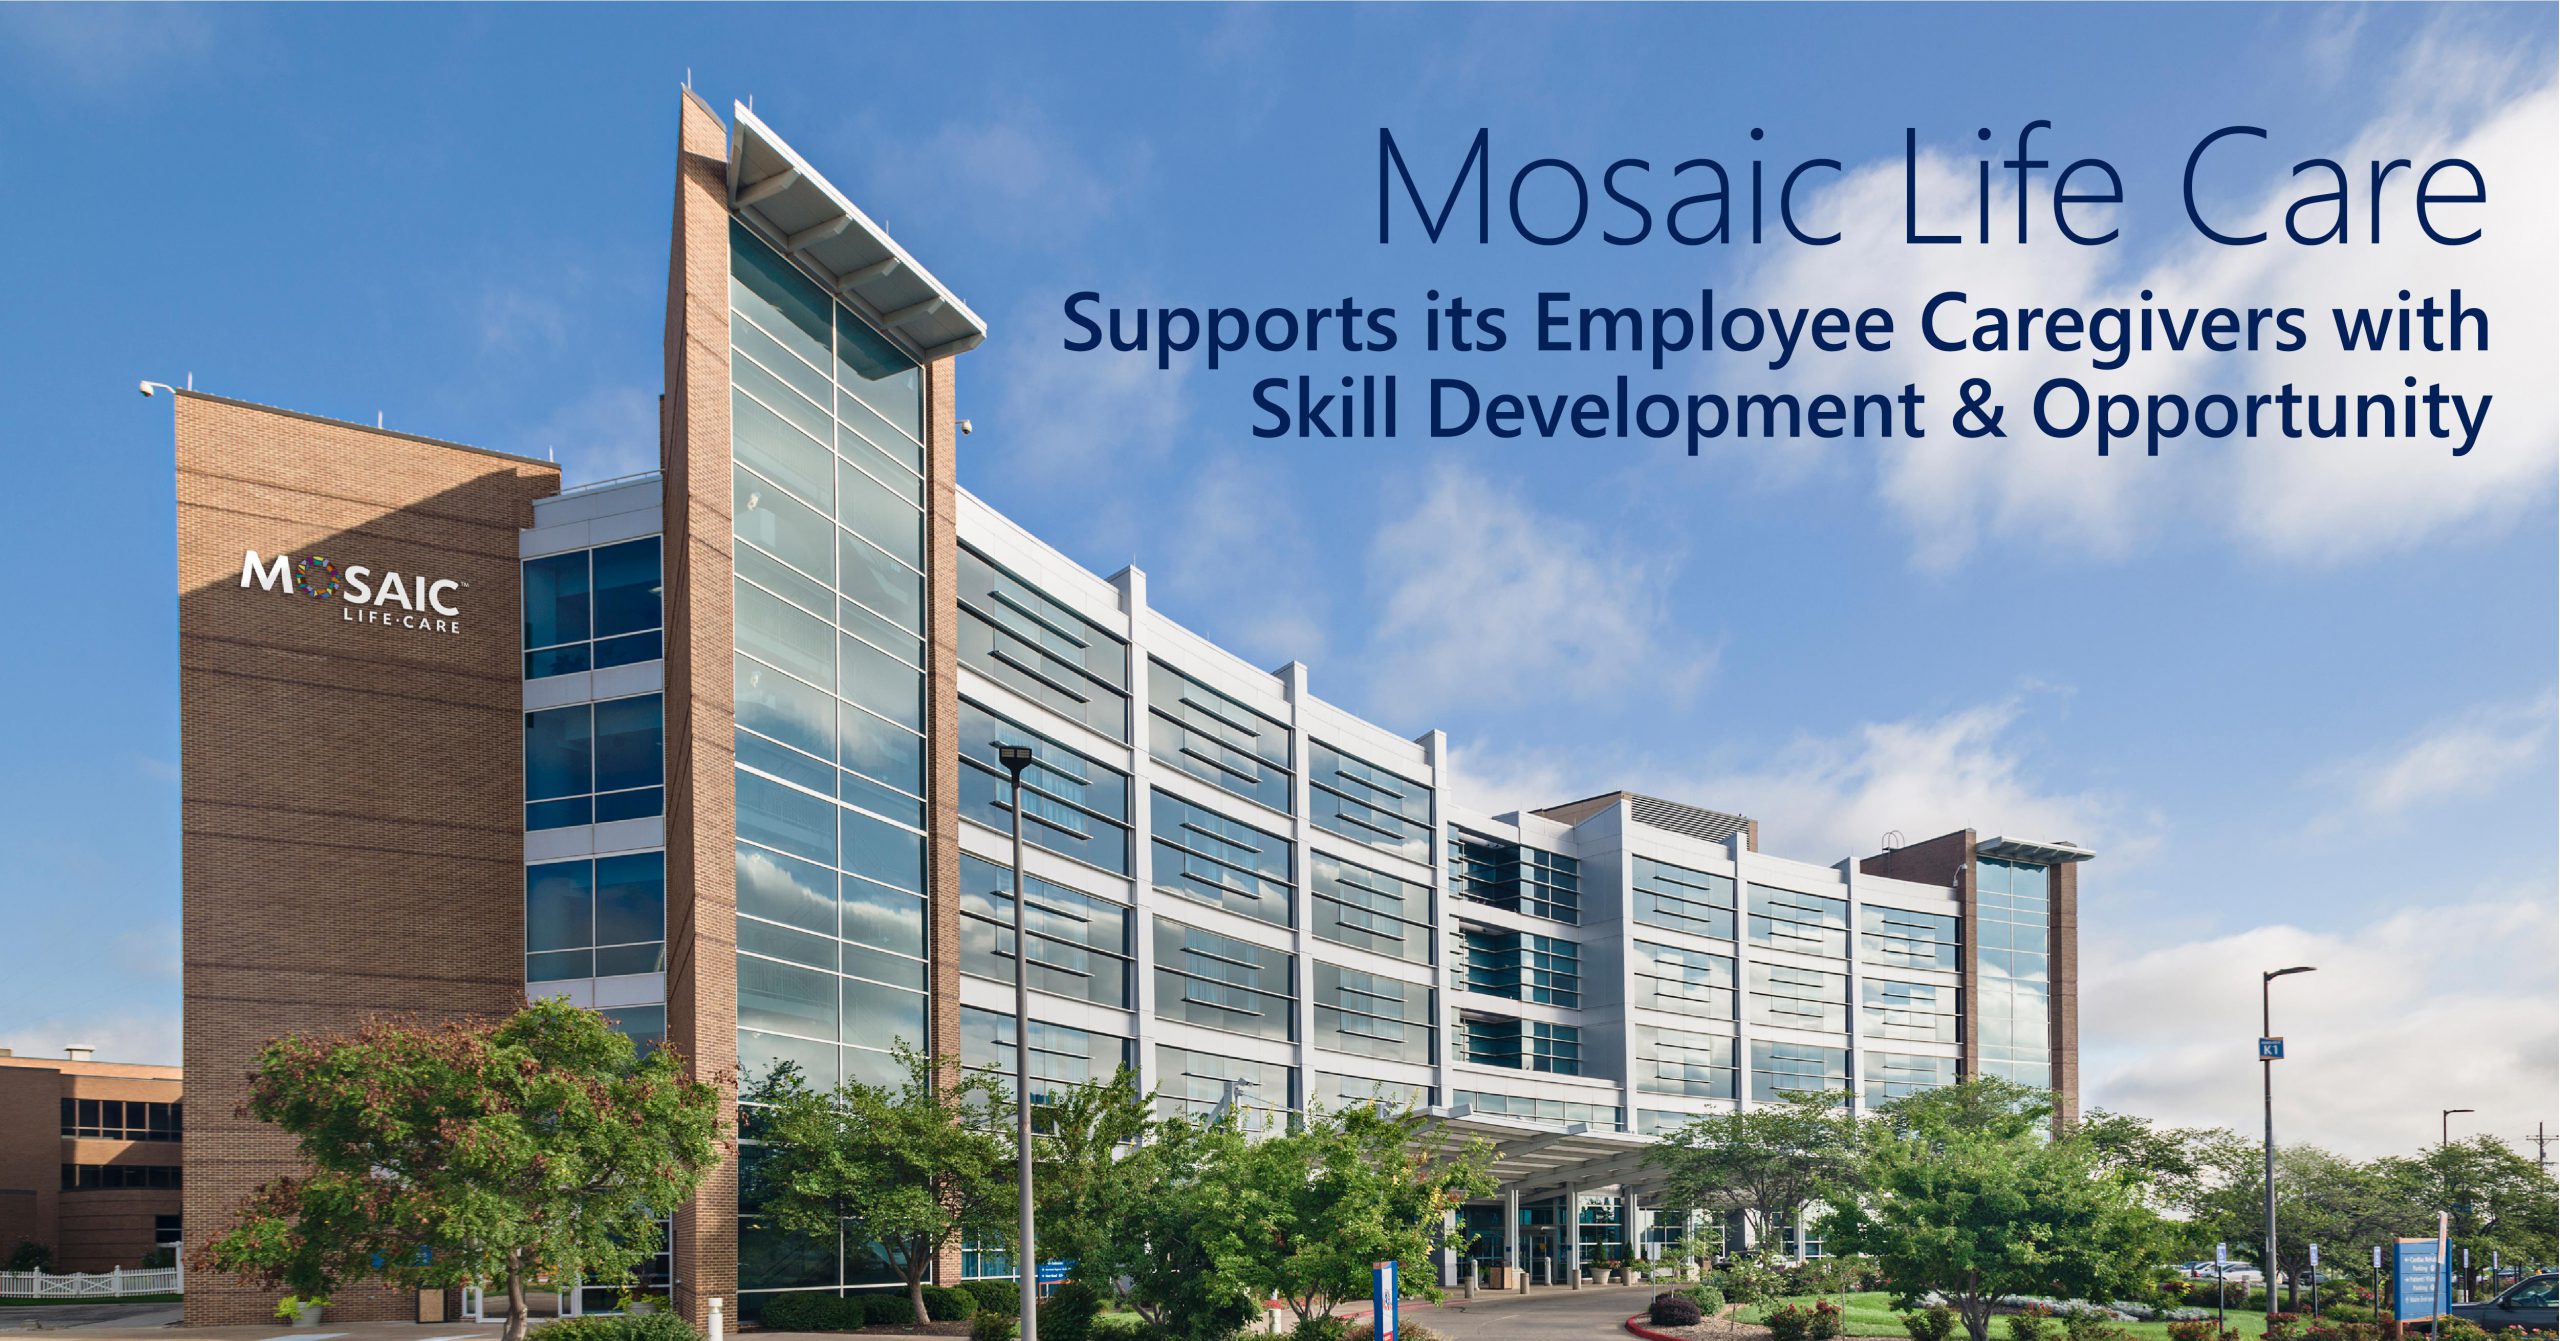 The title of the article (Mosaic Life Care Supports its Employee Caregivers with Skill Development and Opportunity" is superimposed over a photo of the Mosaic Life Care hospital. The blue sky is seen overhead with a few wispy clouds. The hospital has many windows and the building has a curved shape.